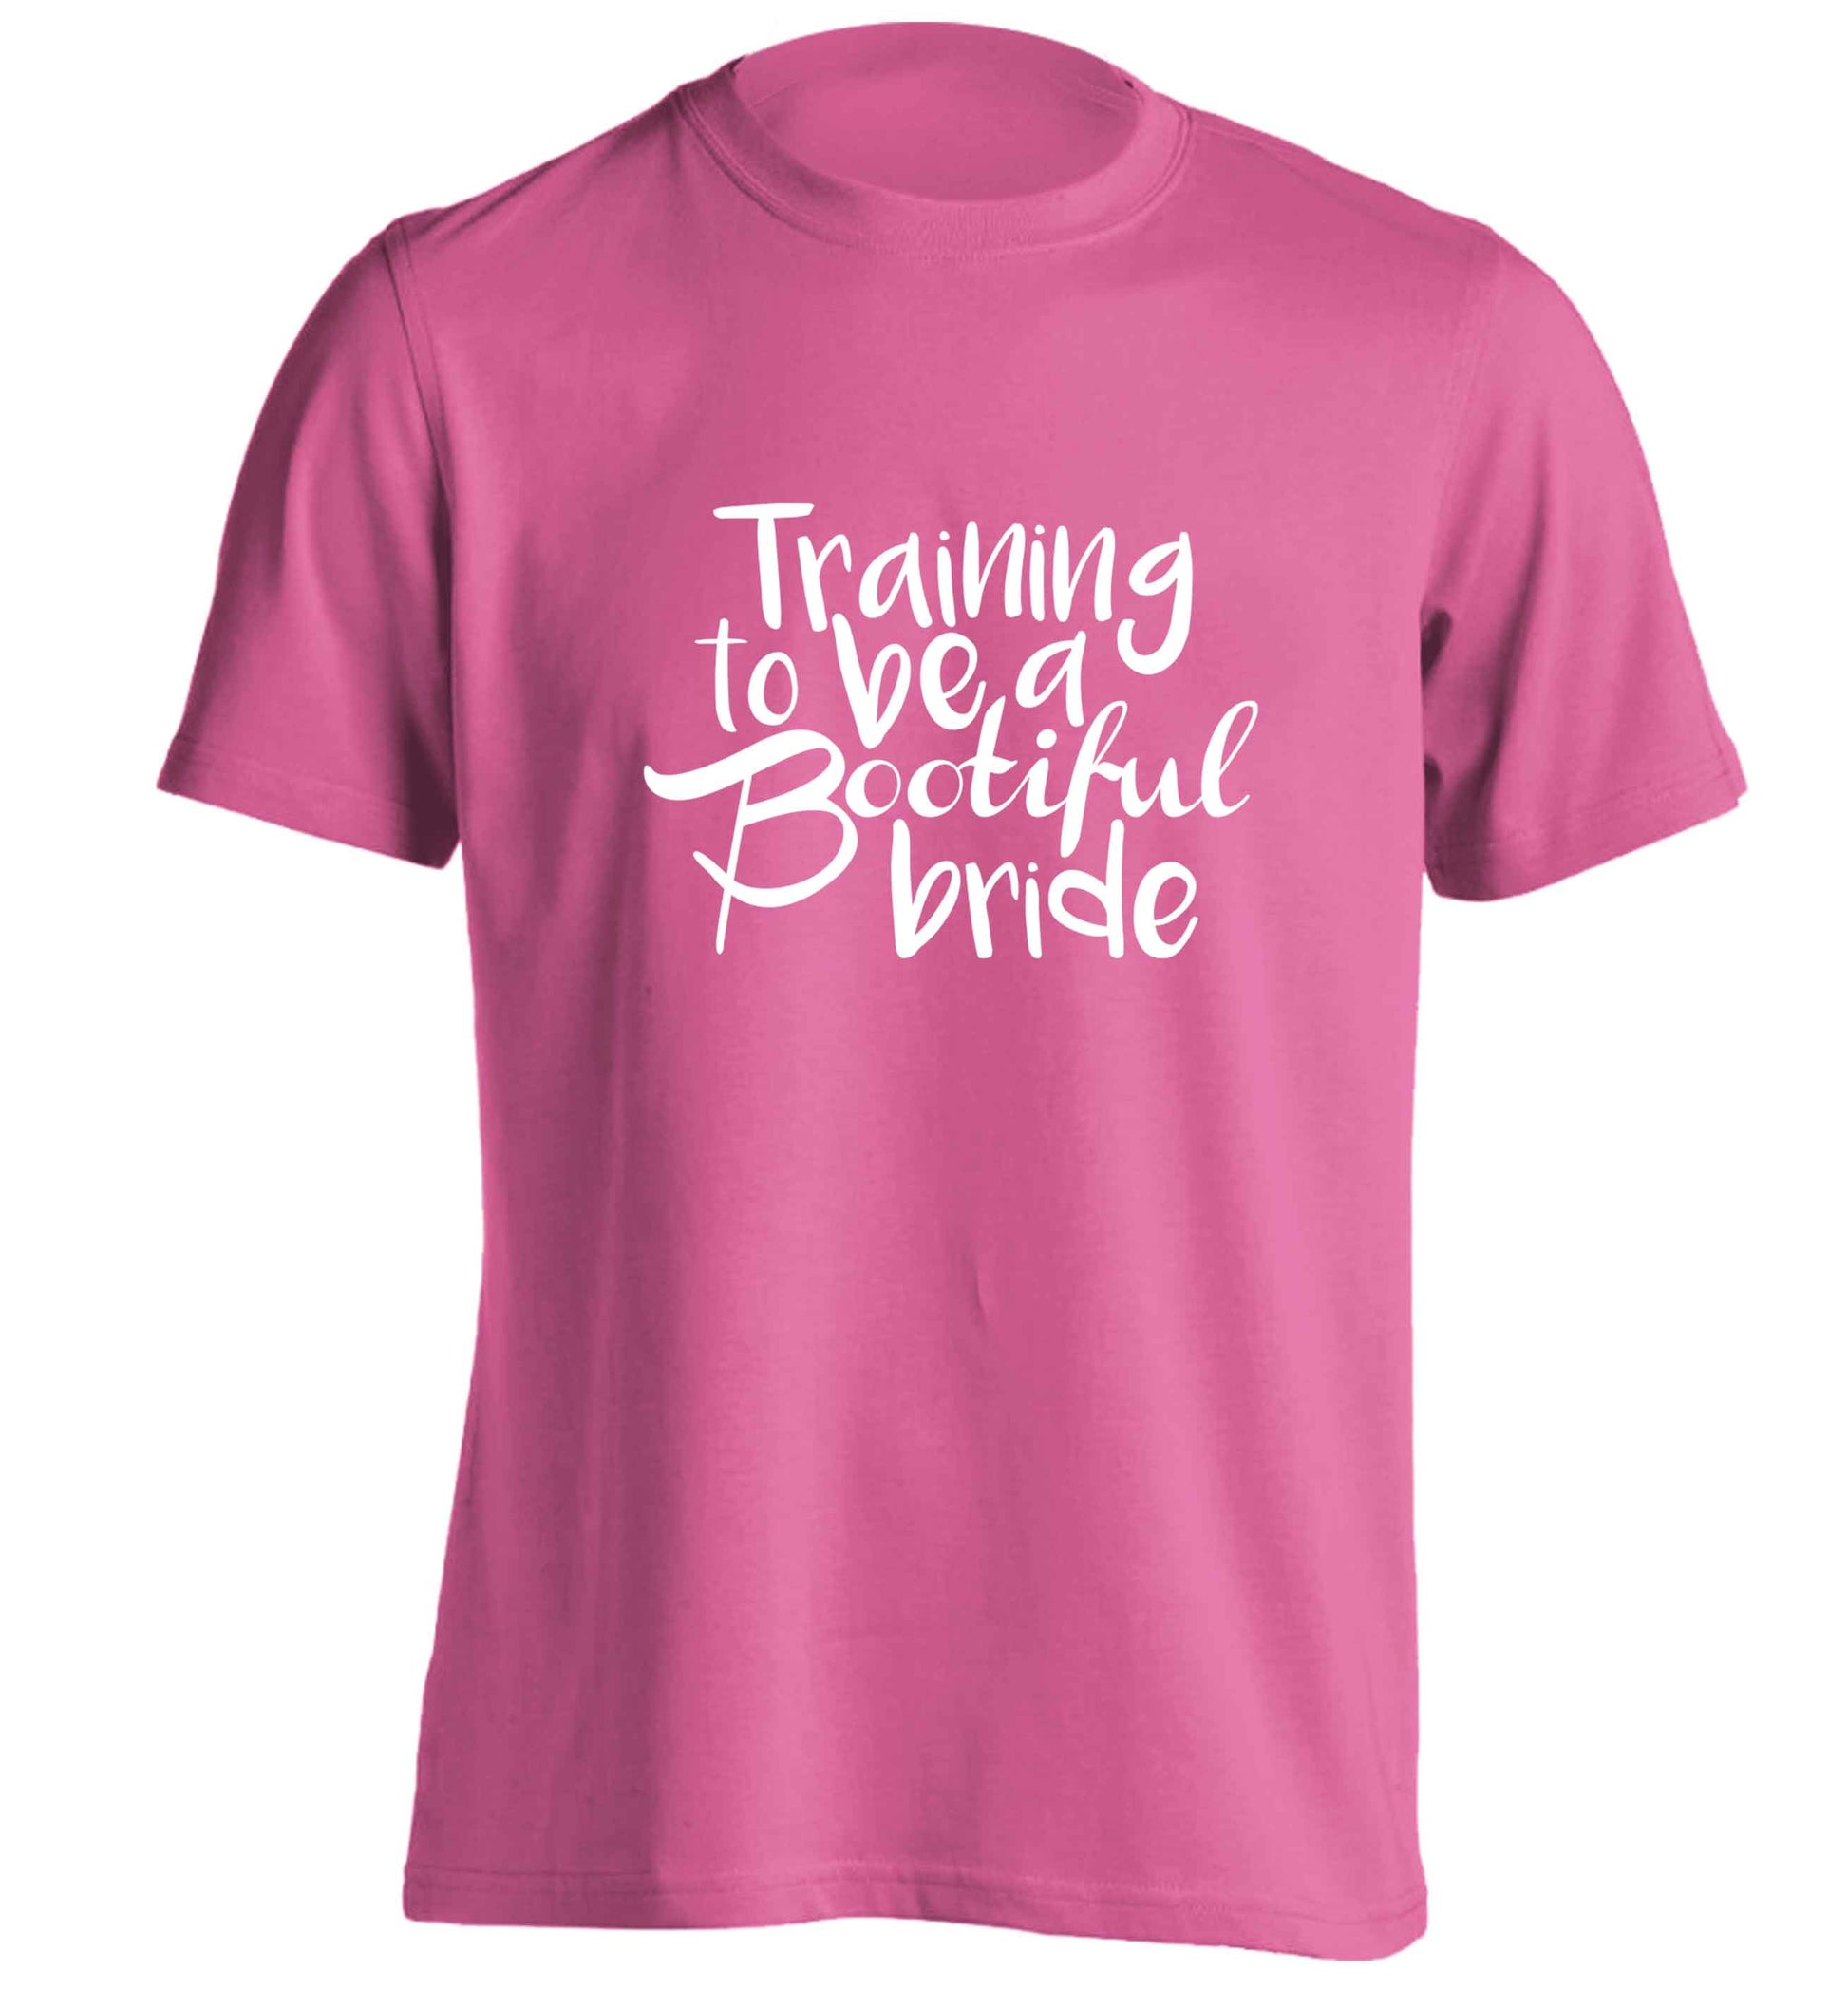 Get motivated and get fit for your big day! Our workout quotes and designs will get you ready to sweat! Perfect for any bride, groom or bridesmaid to be!  adults unisex pink Tshirt 2XL